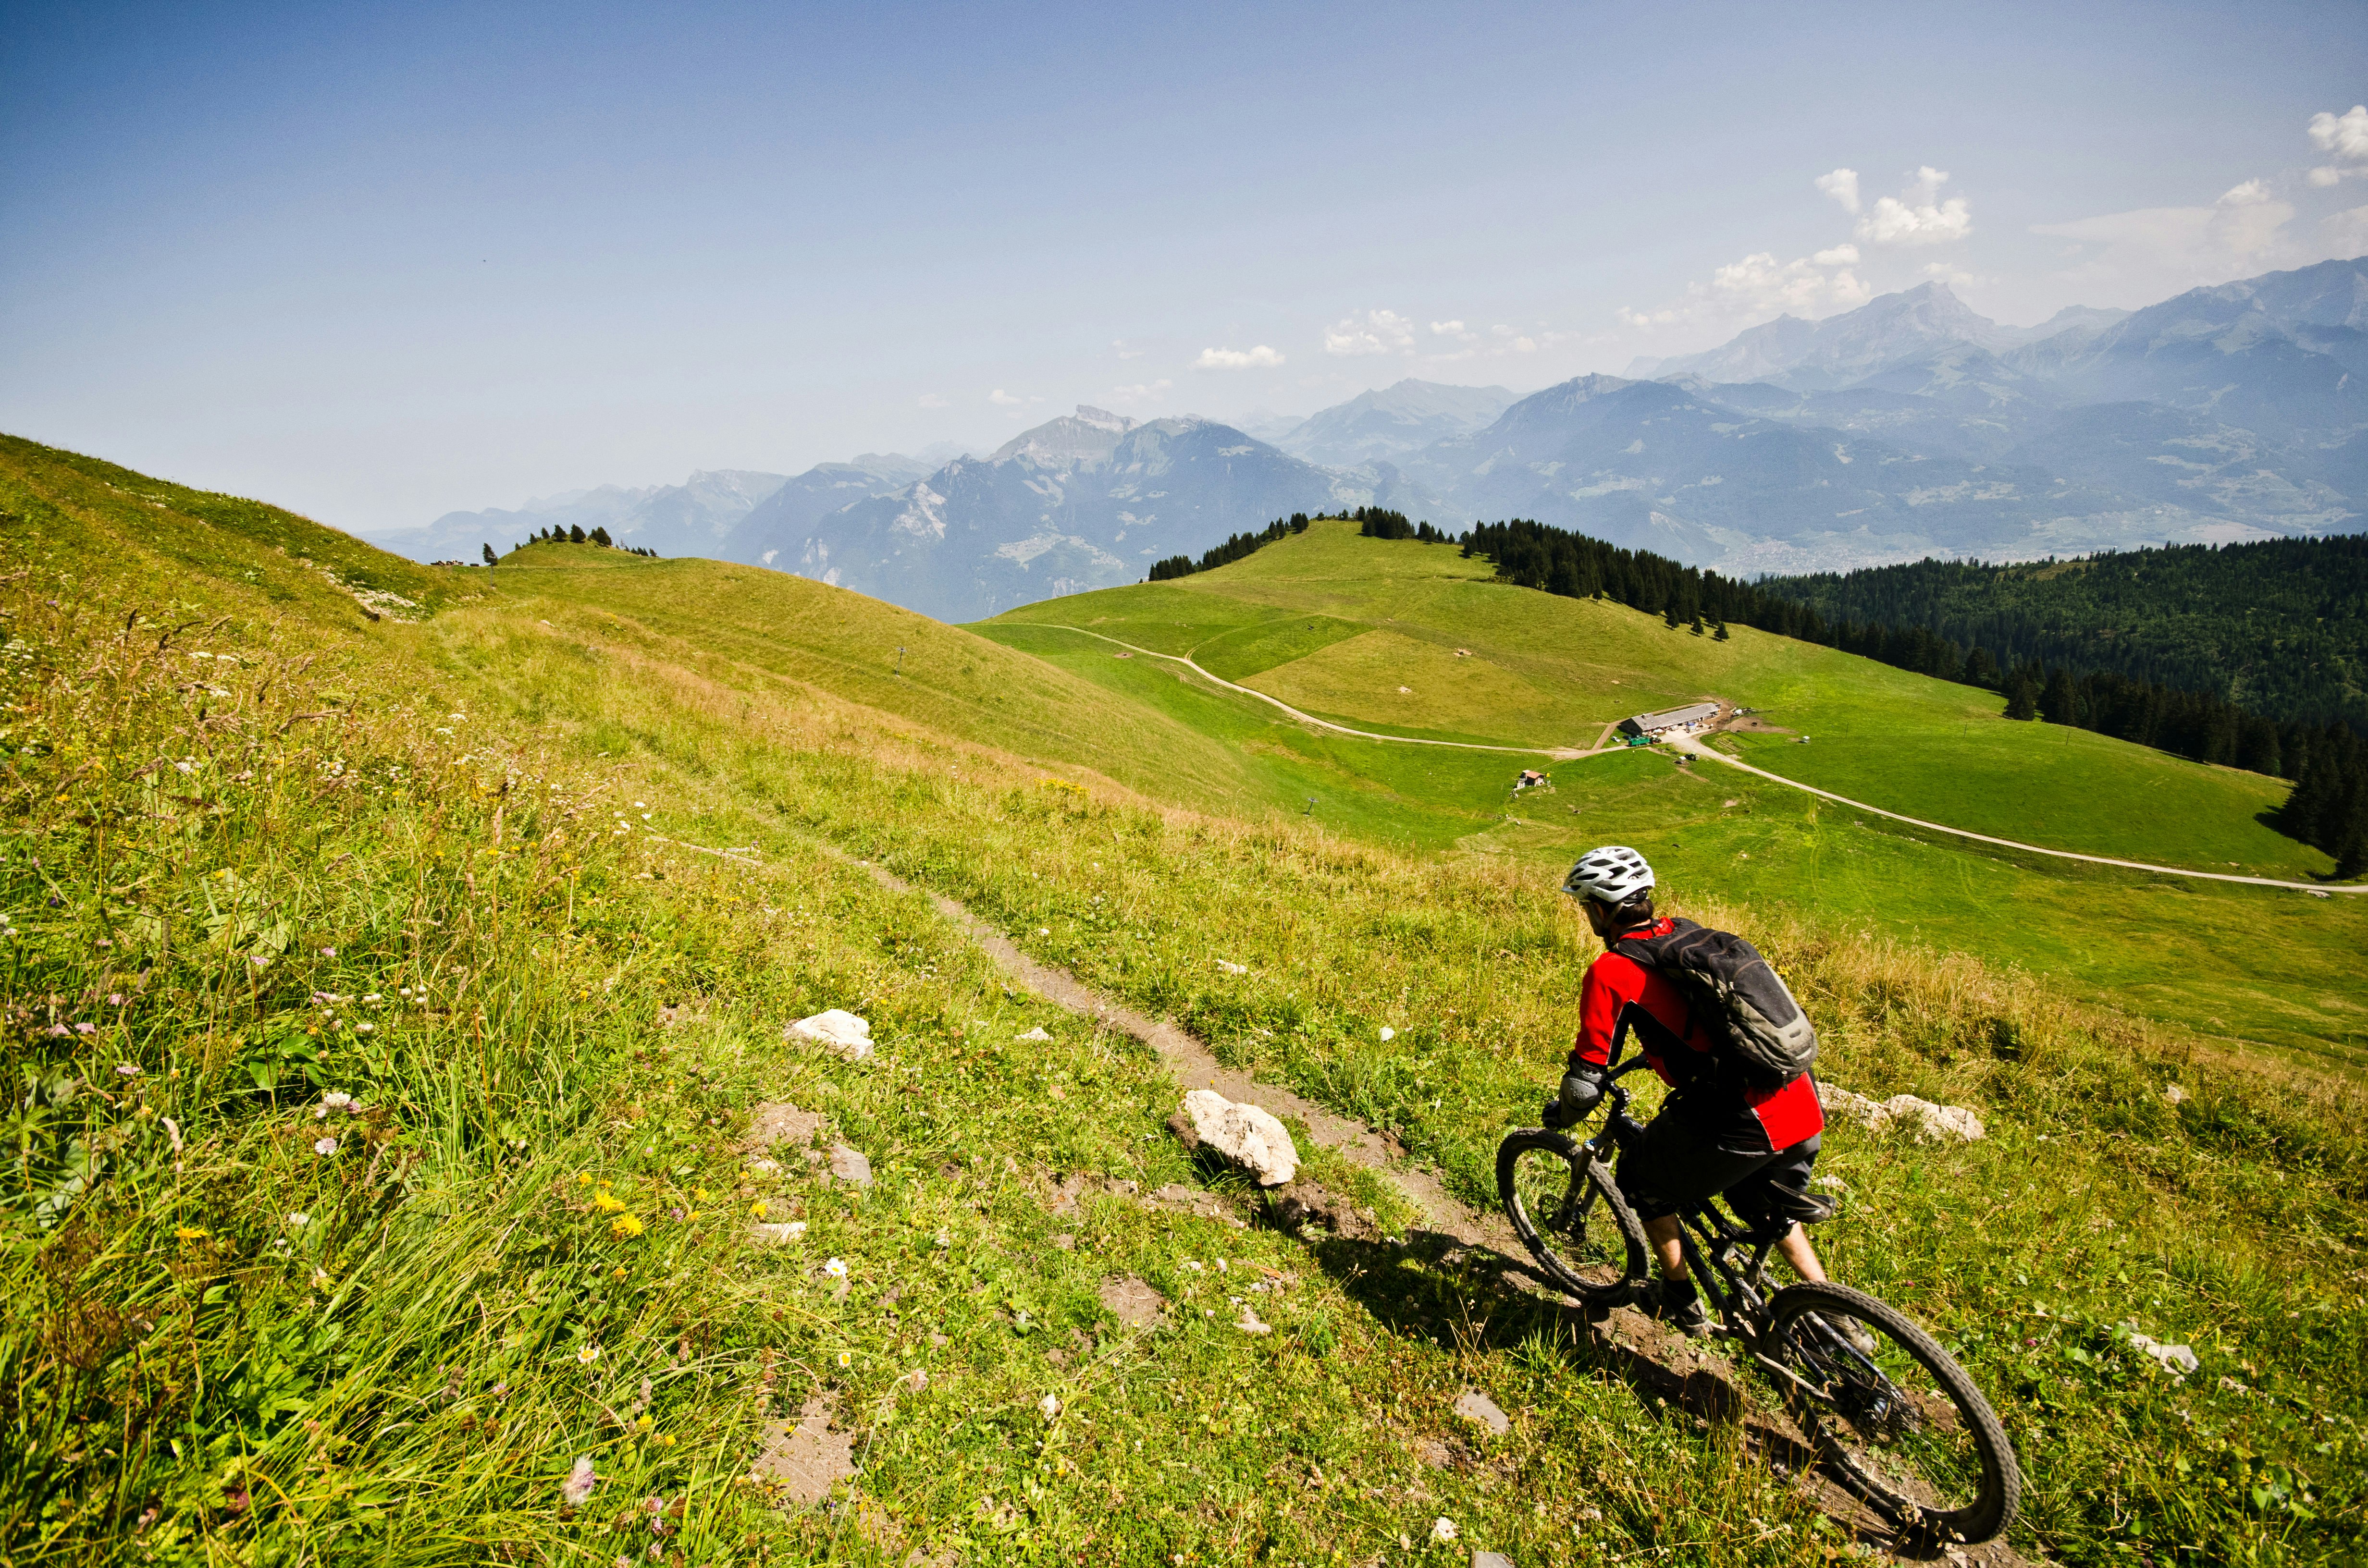 A mountain biker on a trail surrounded by green hillsides